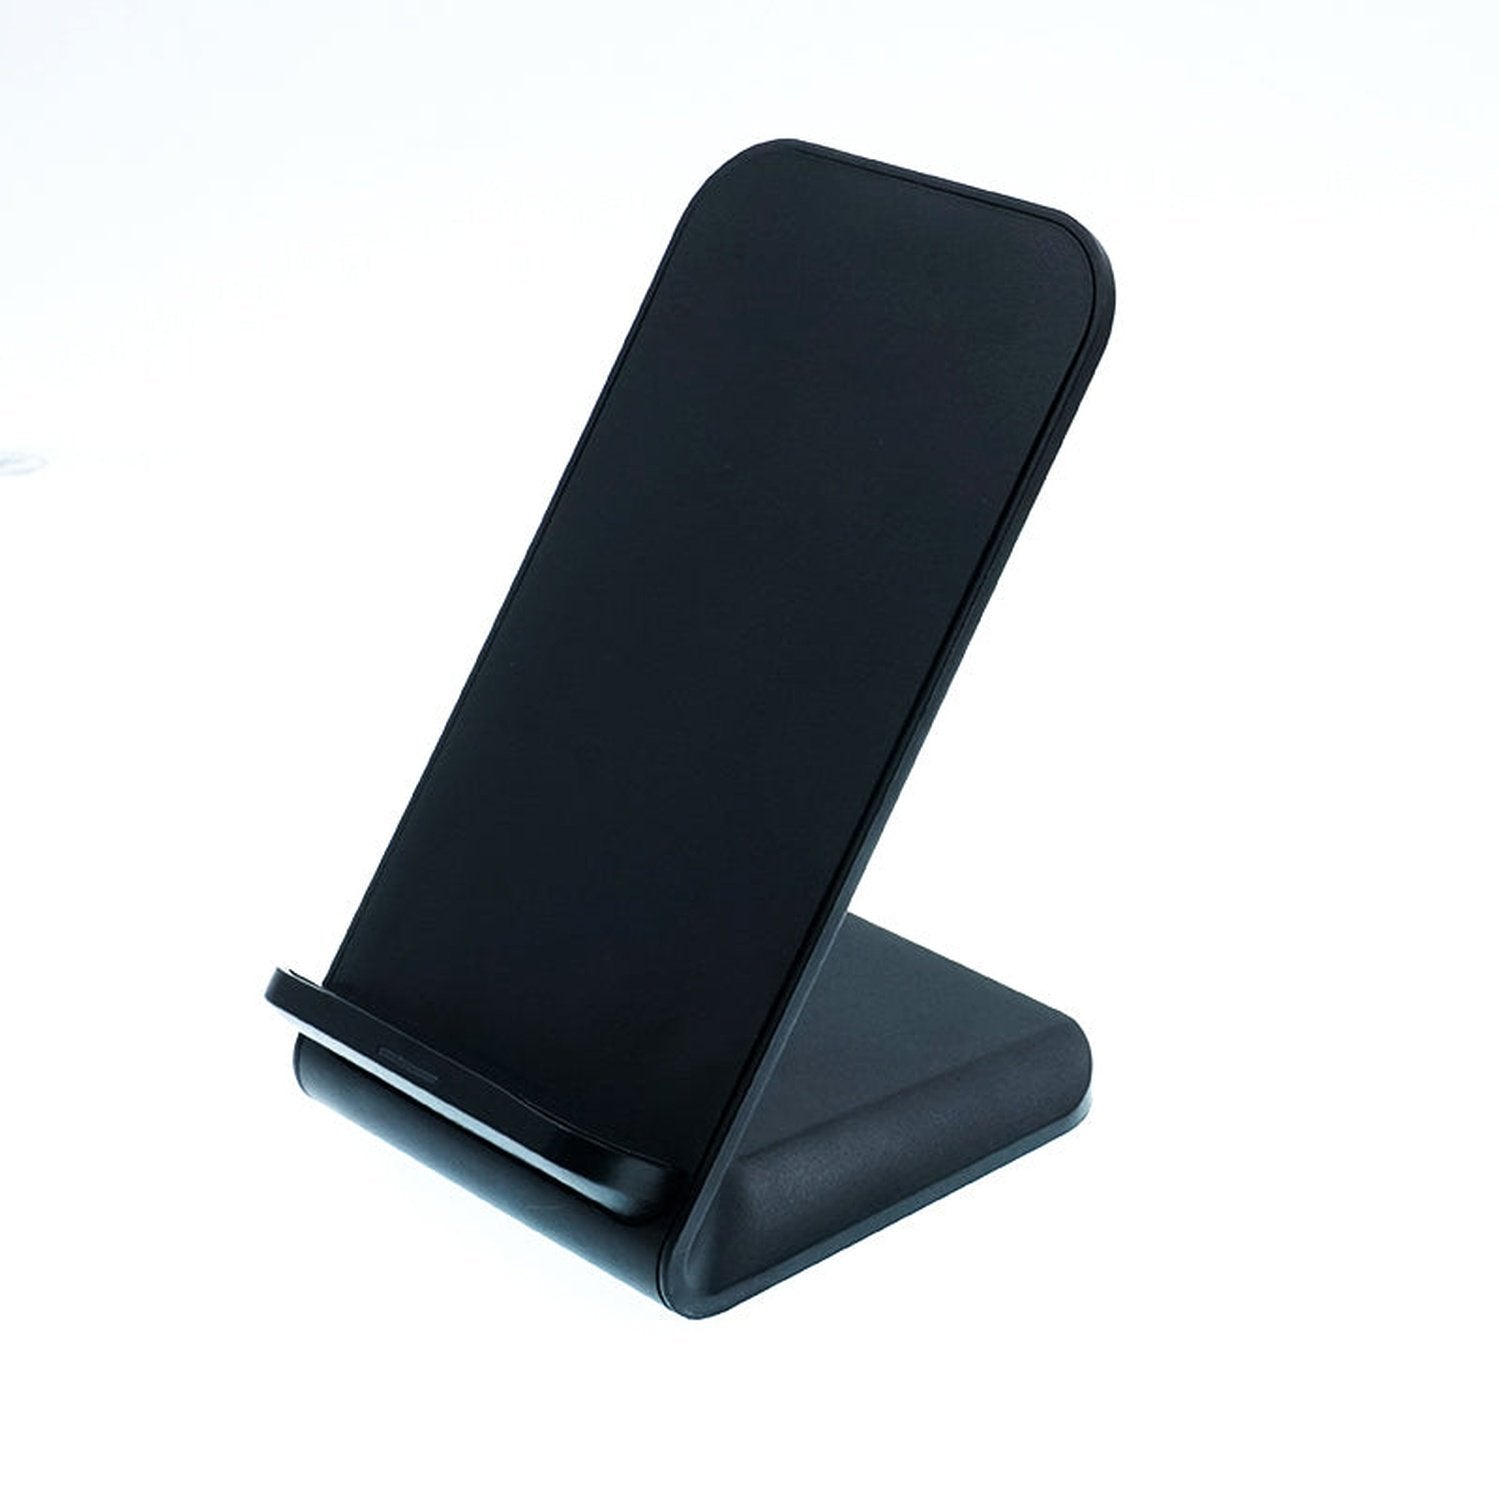 Wireless Charger Stand 10W - Fast Qi-Certified Phone Charger